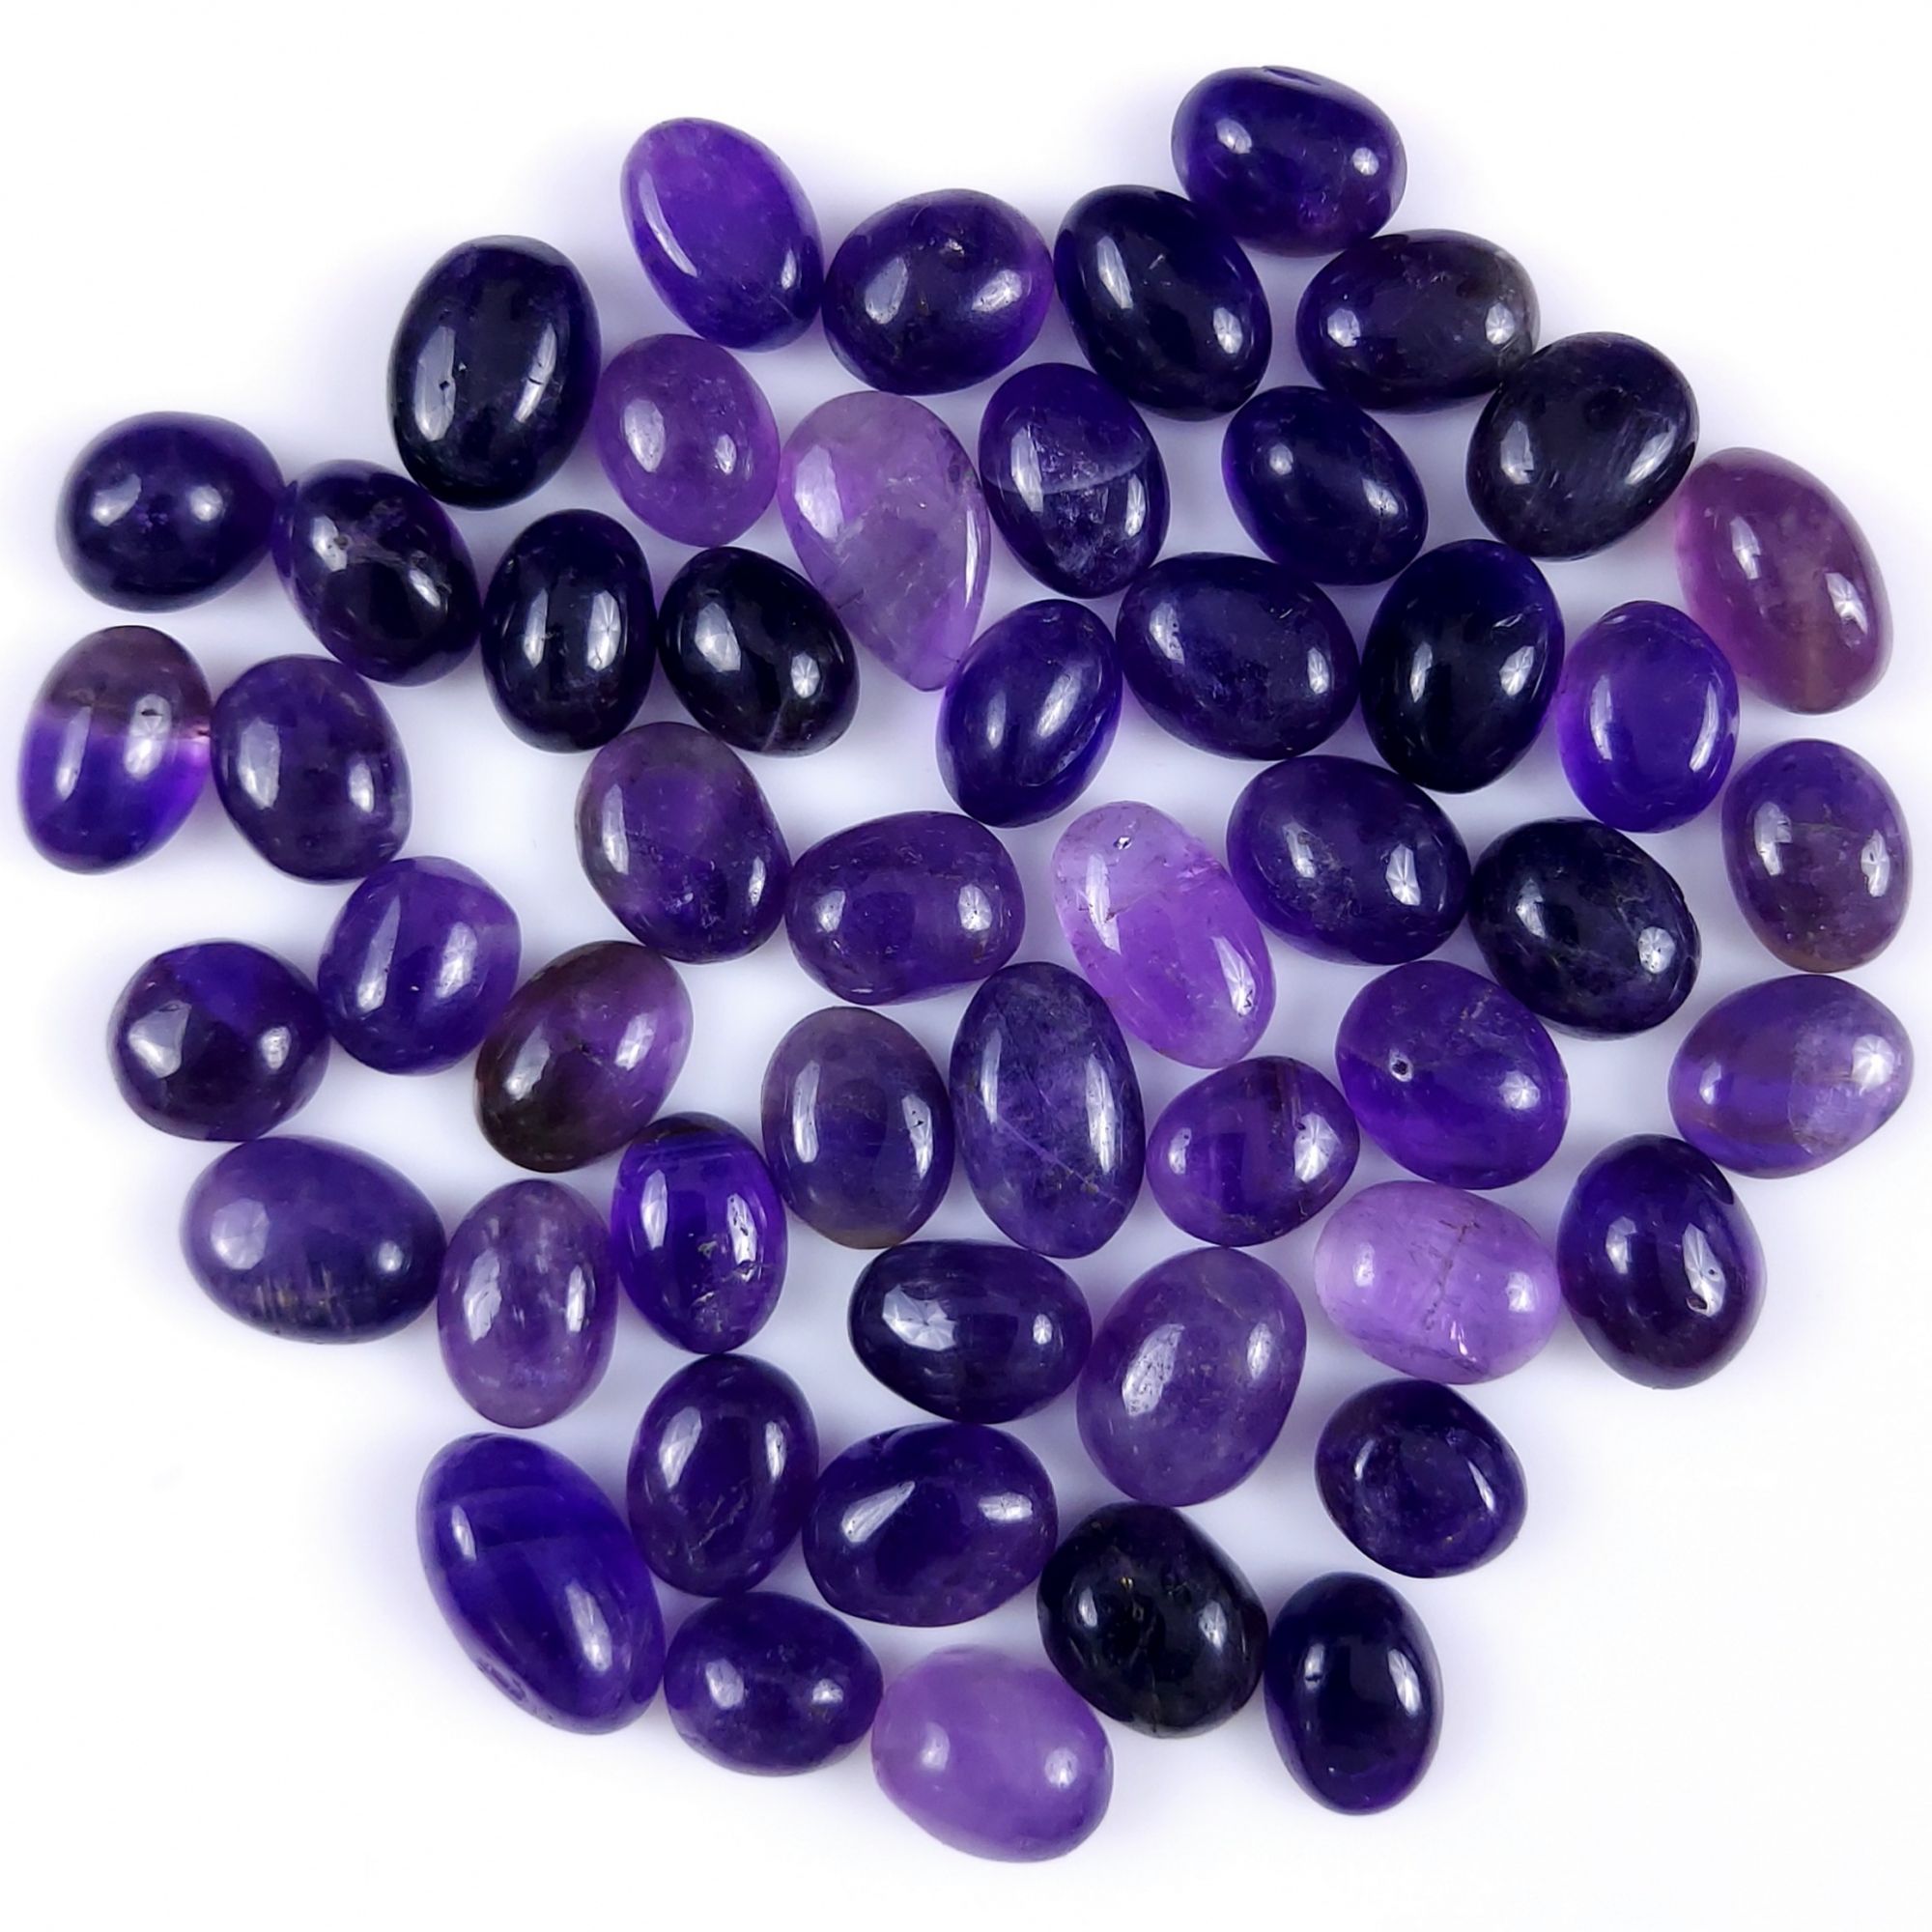 51Pcs Lot 412Cts Natural Purple Amethyst Mix Shape Cabochon Lot  Loose Gemstones Crystal For Jewelry Making  13x7 10x7mm#G-252